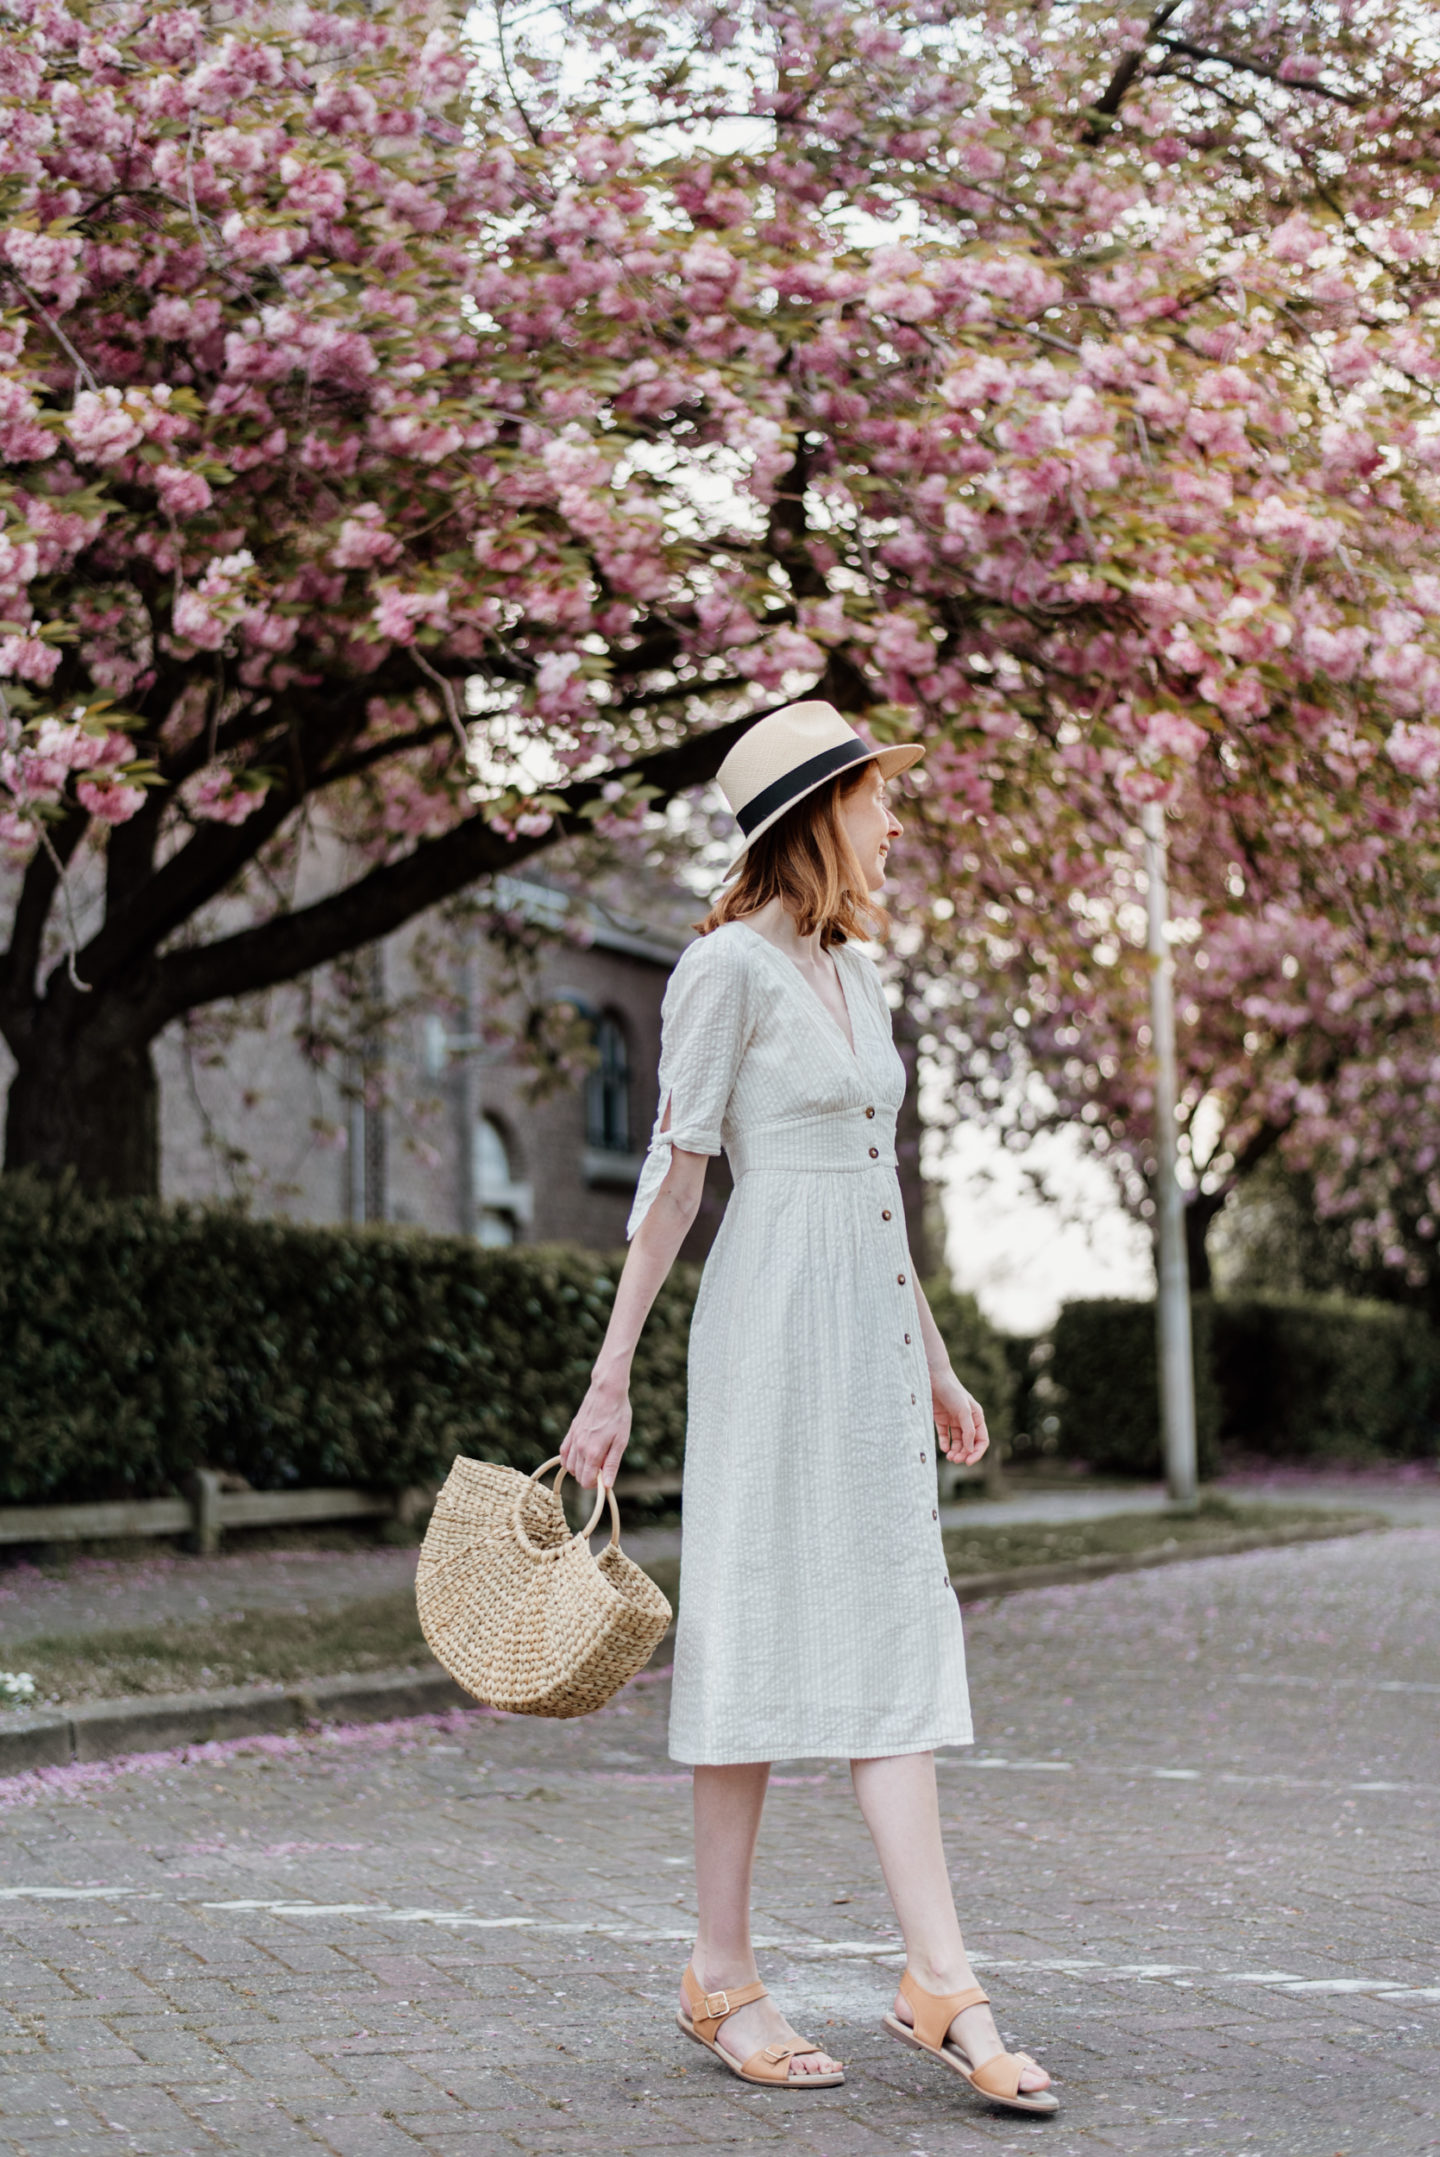 Girl in white dress and with a straw bag posing in front of cherry blossoms